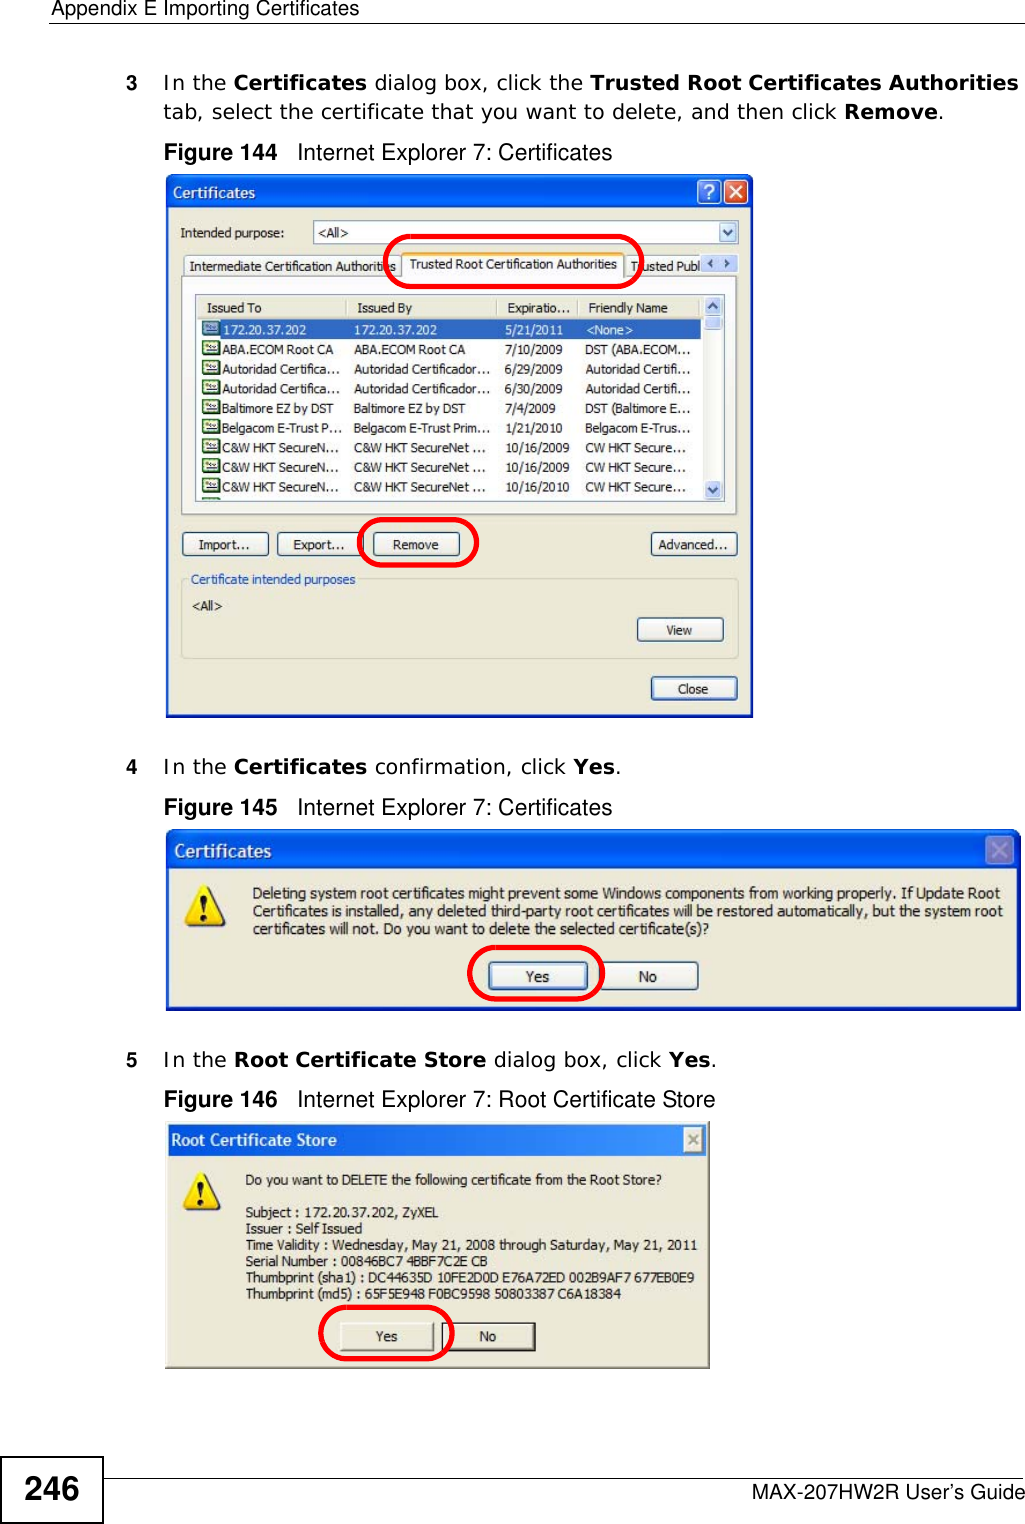 Appendix E Importing CertificatesMAX-207HW2R User’s Guide2463In the Certificates dialog box, click the Trusted Root Certificates Authorities tab, select the certificate that you want to delete, and then click Remove.Figure 144   Internet Explorer 7: Certificates4In the Certificates confirmation, click Yes.Figure 145   Internet Explorer 7: Certificates5In the Root Certificate Store dialog box, click Yes.Figure 146   Internet Explorer 7: Root Certificate Store